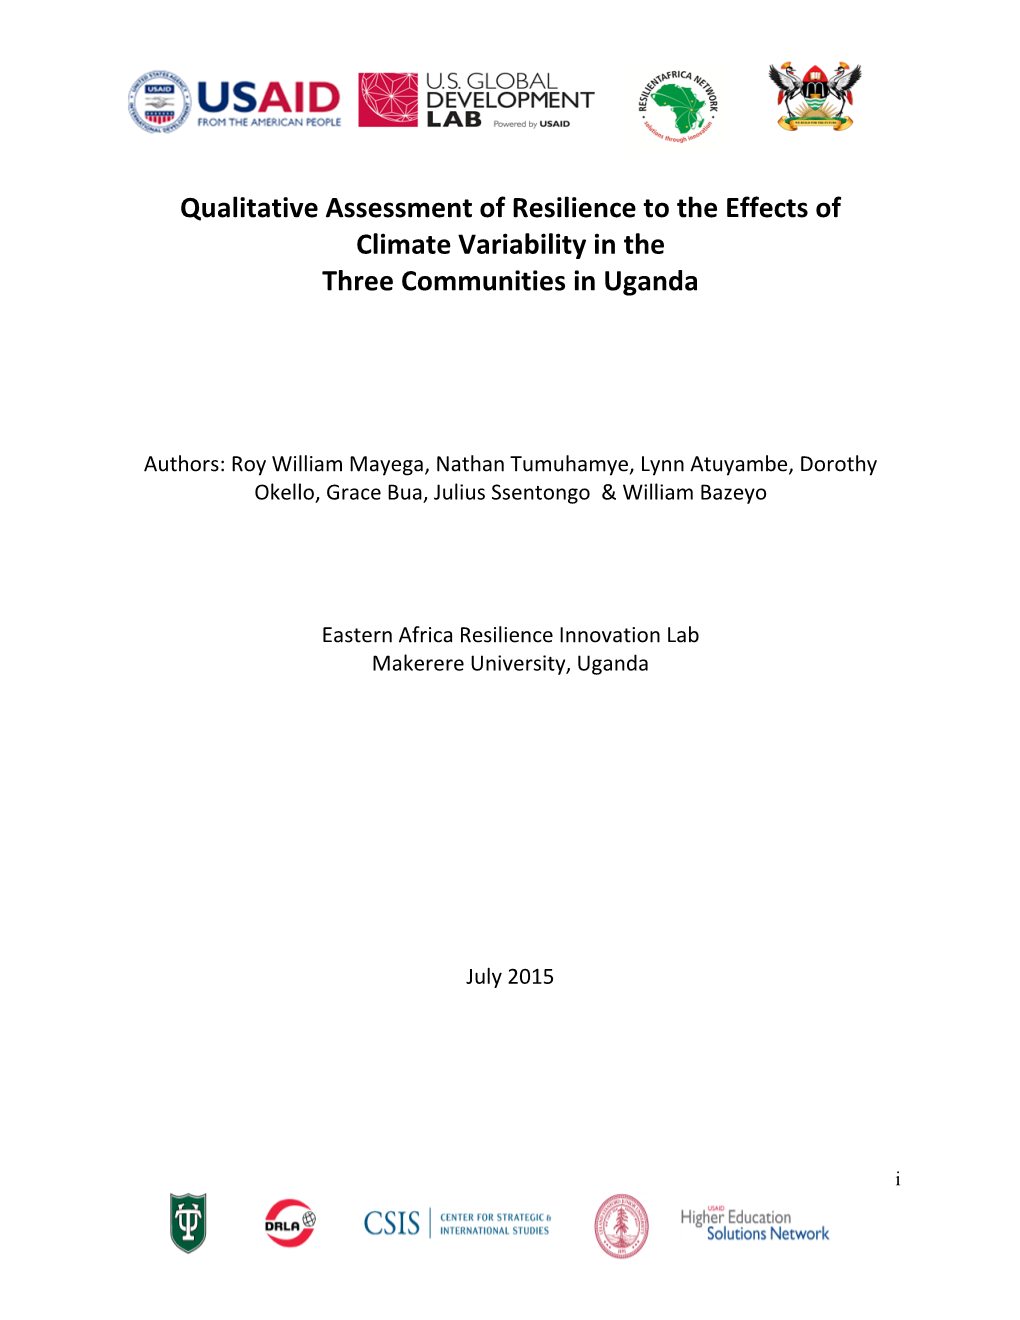 Qualitative Assessment of Resilience to the Effects of Climate Variability in the Three Communities in Uganda